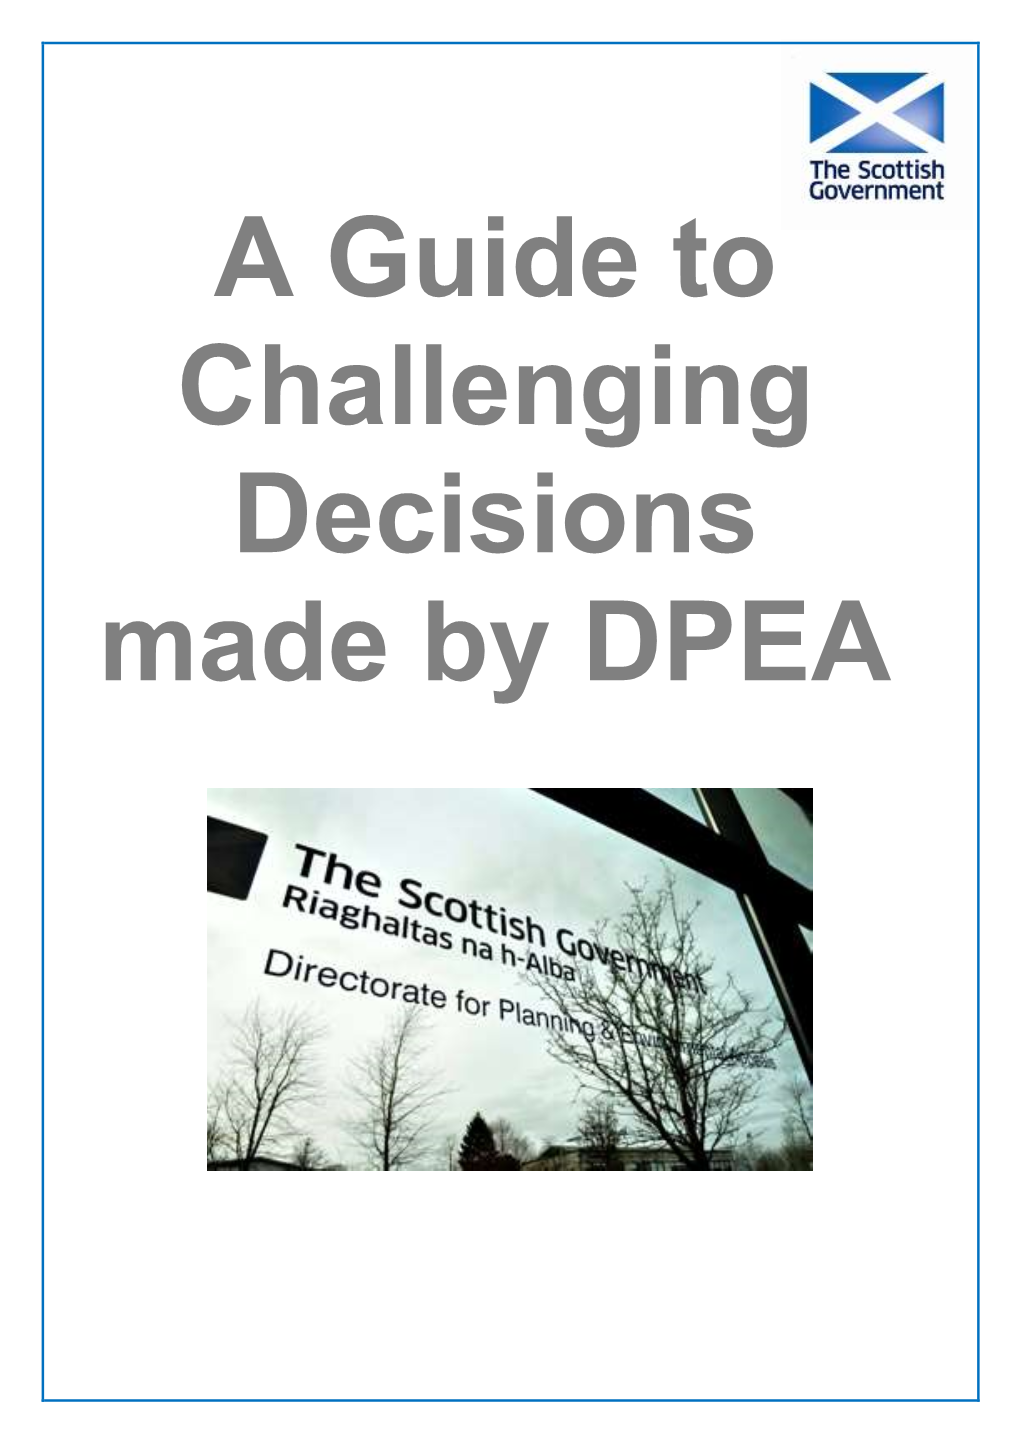 A Guide to Challenging Decisions Made by DPEA.Pdf